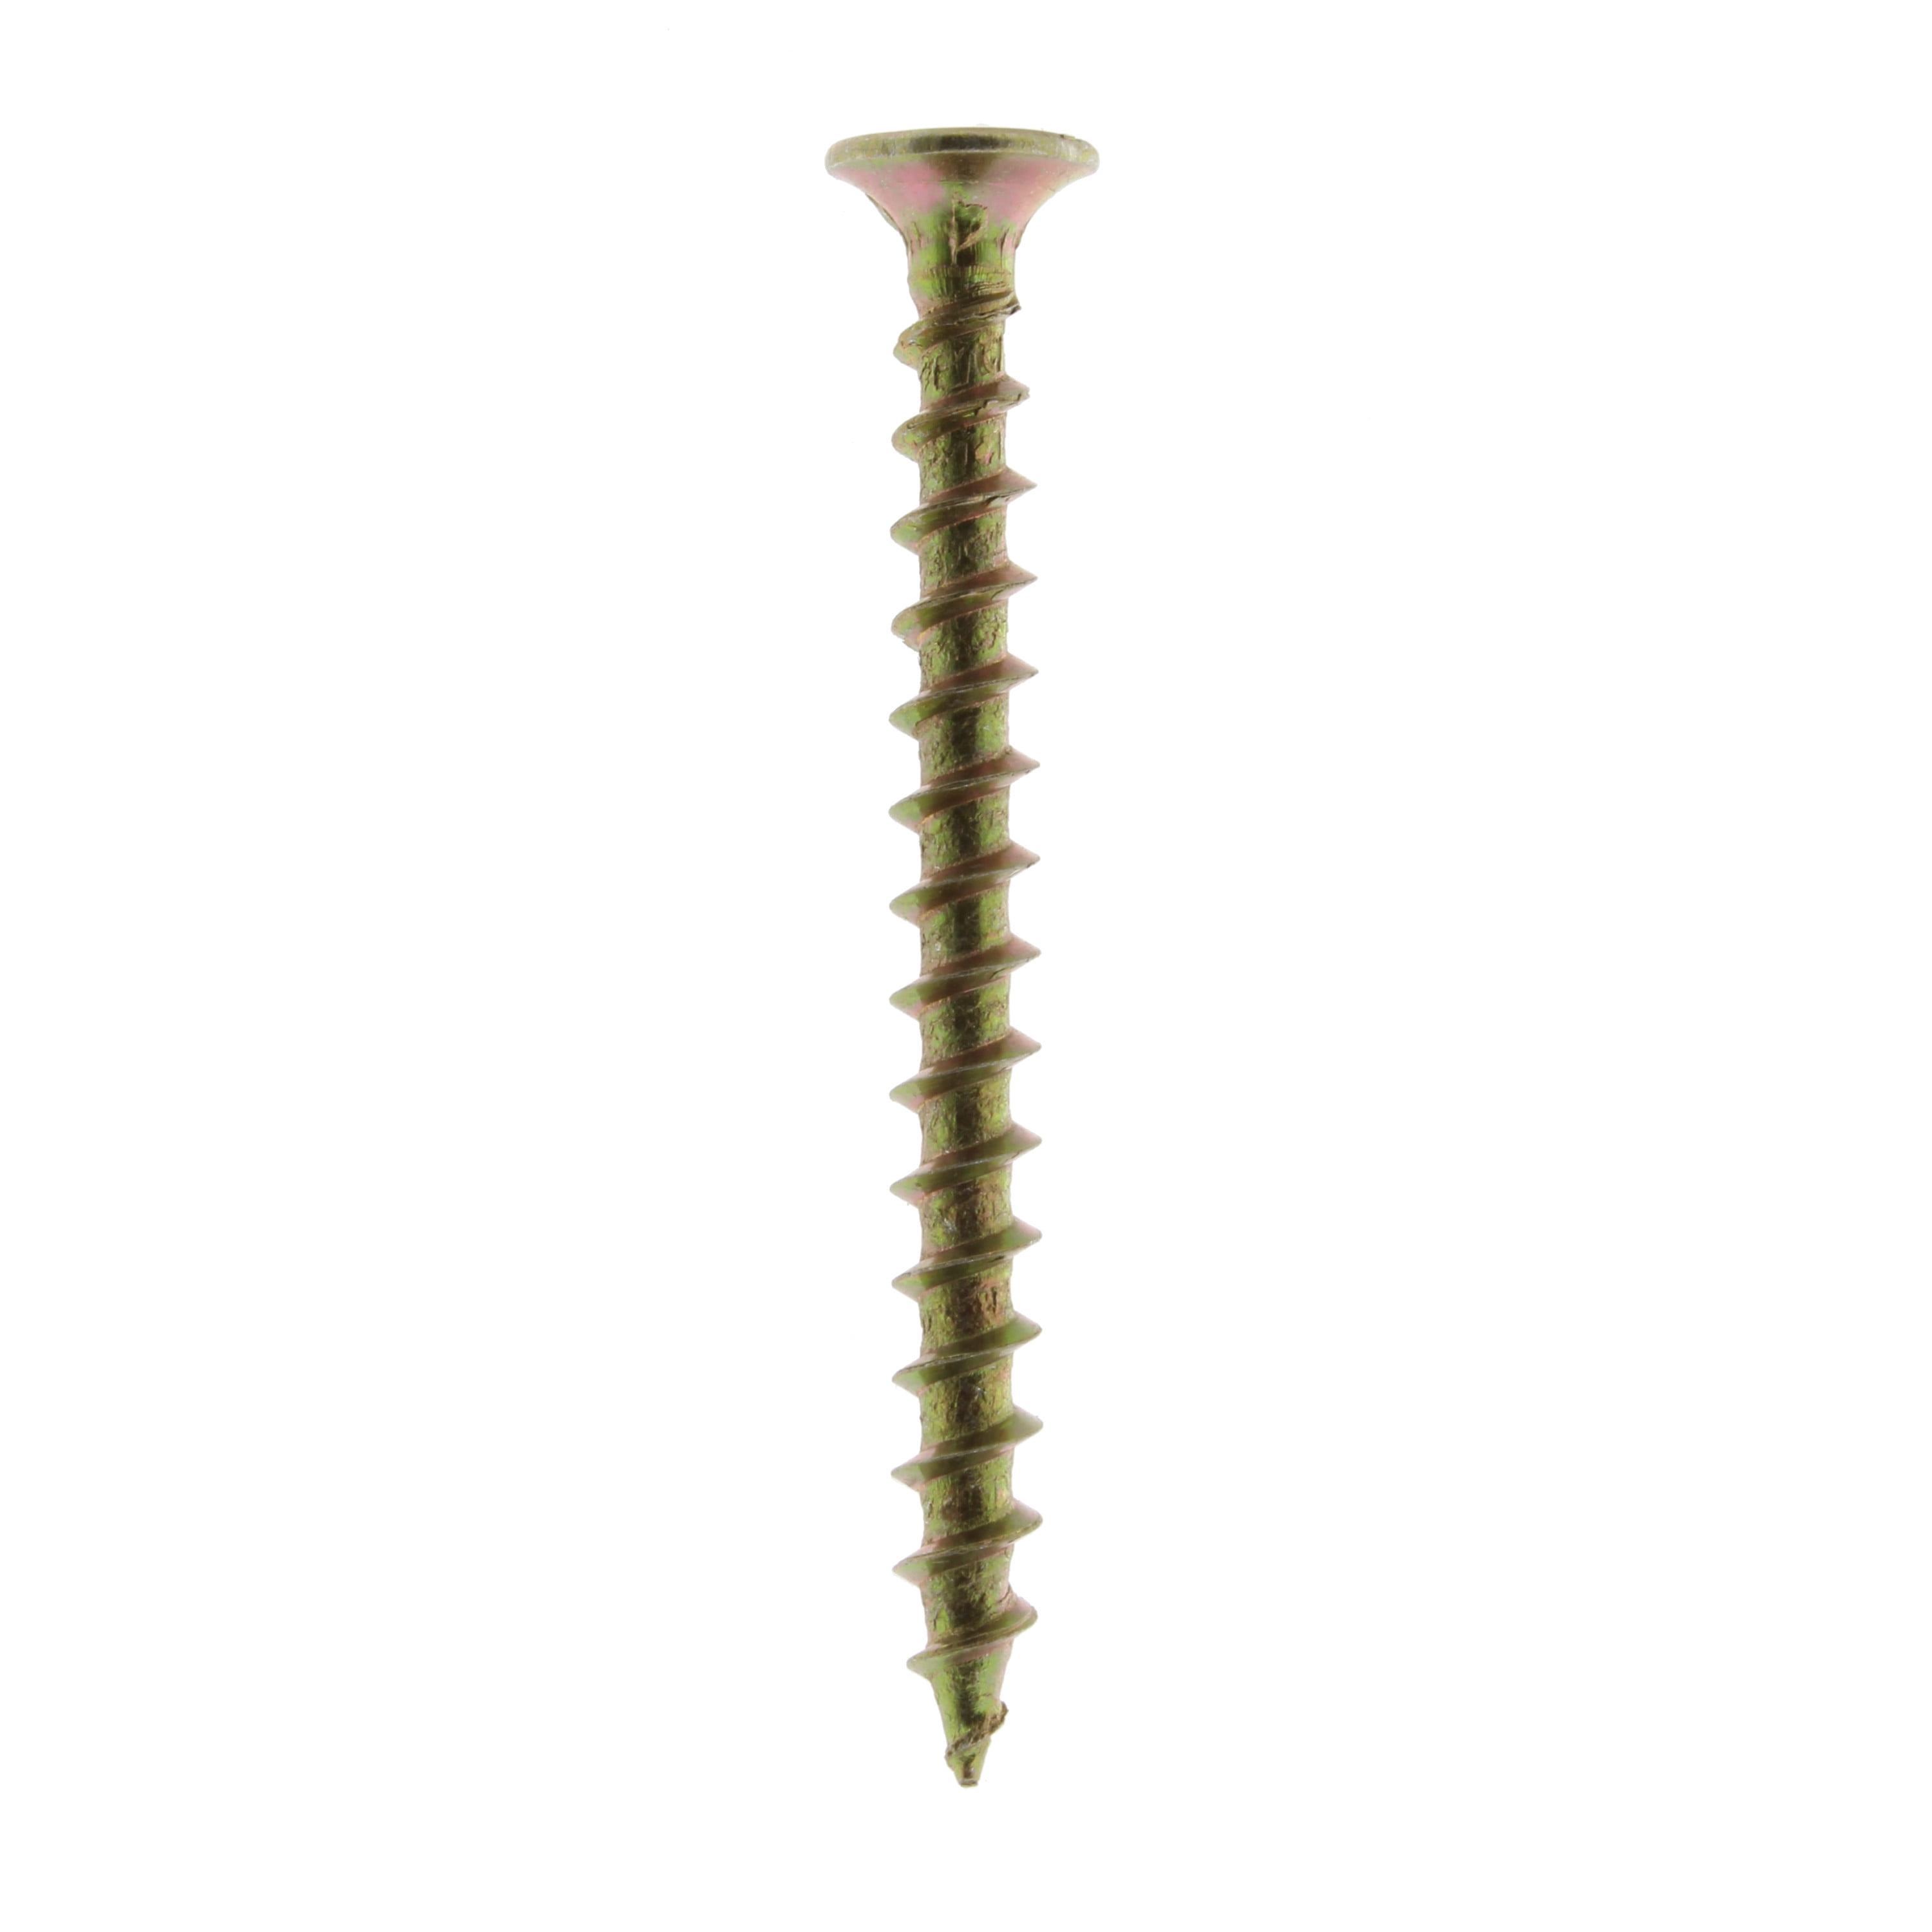 Solid brass wood screws Round raised head No 8 x 2" Pack of 12 *Top Quality!